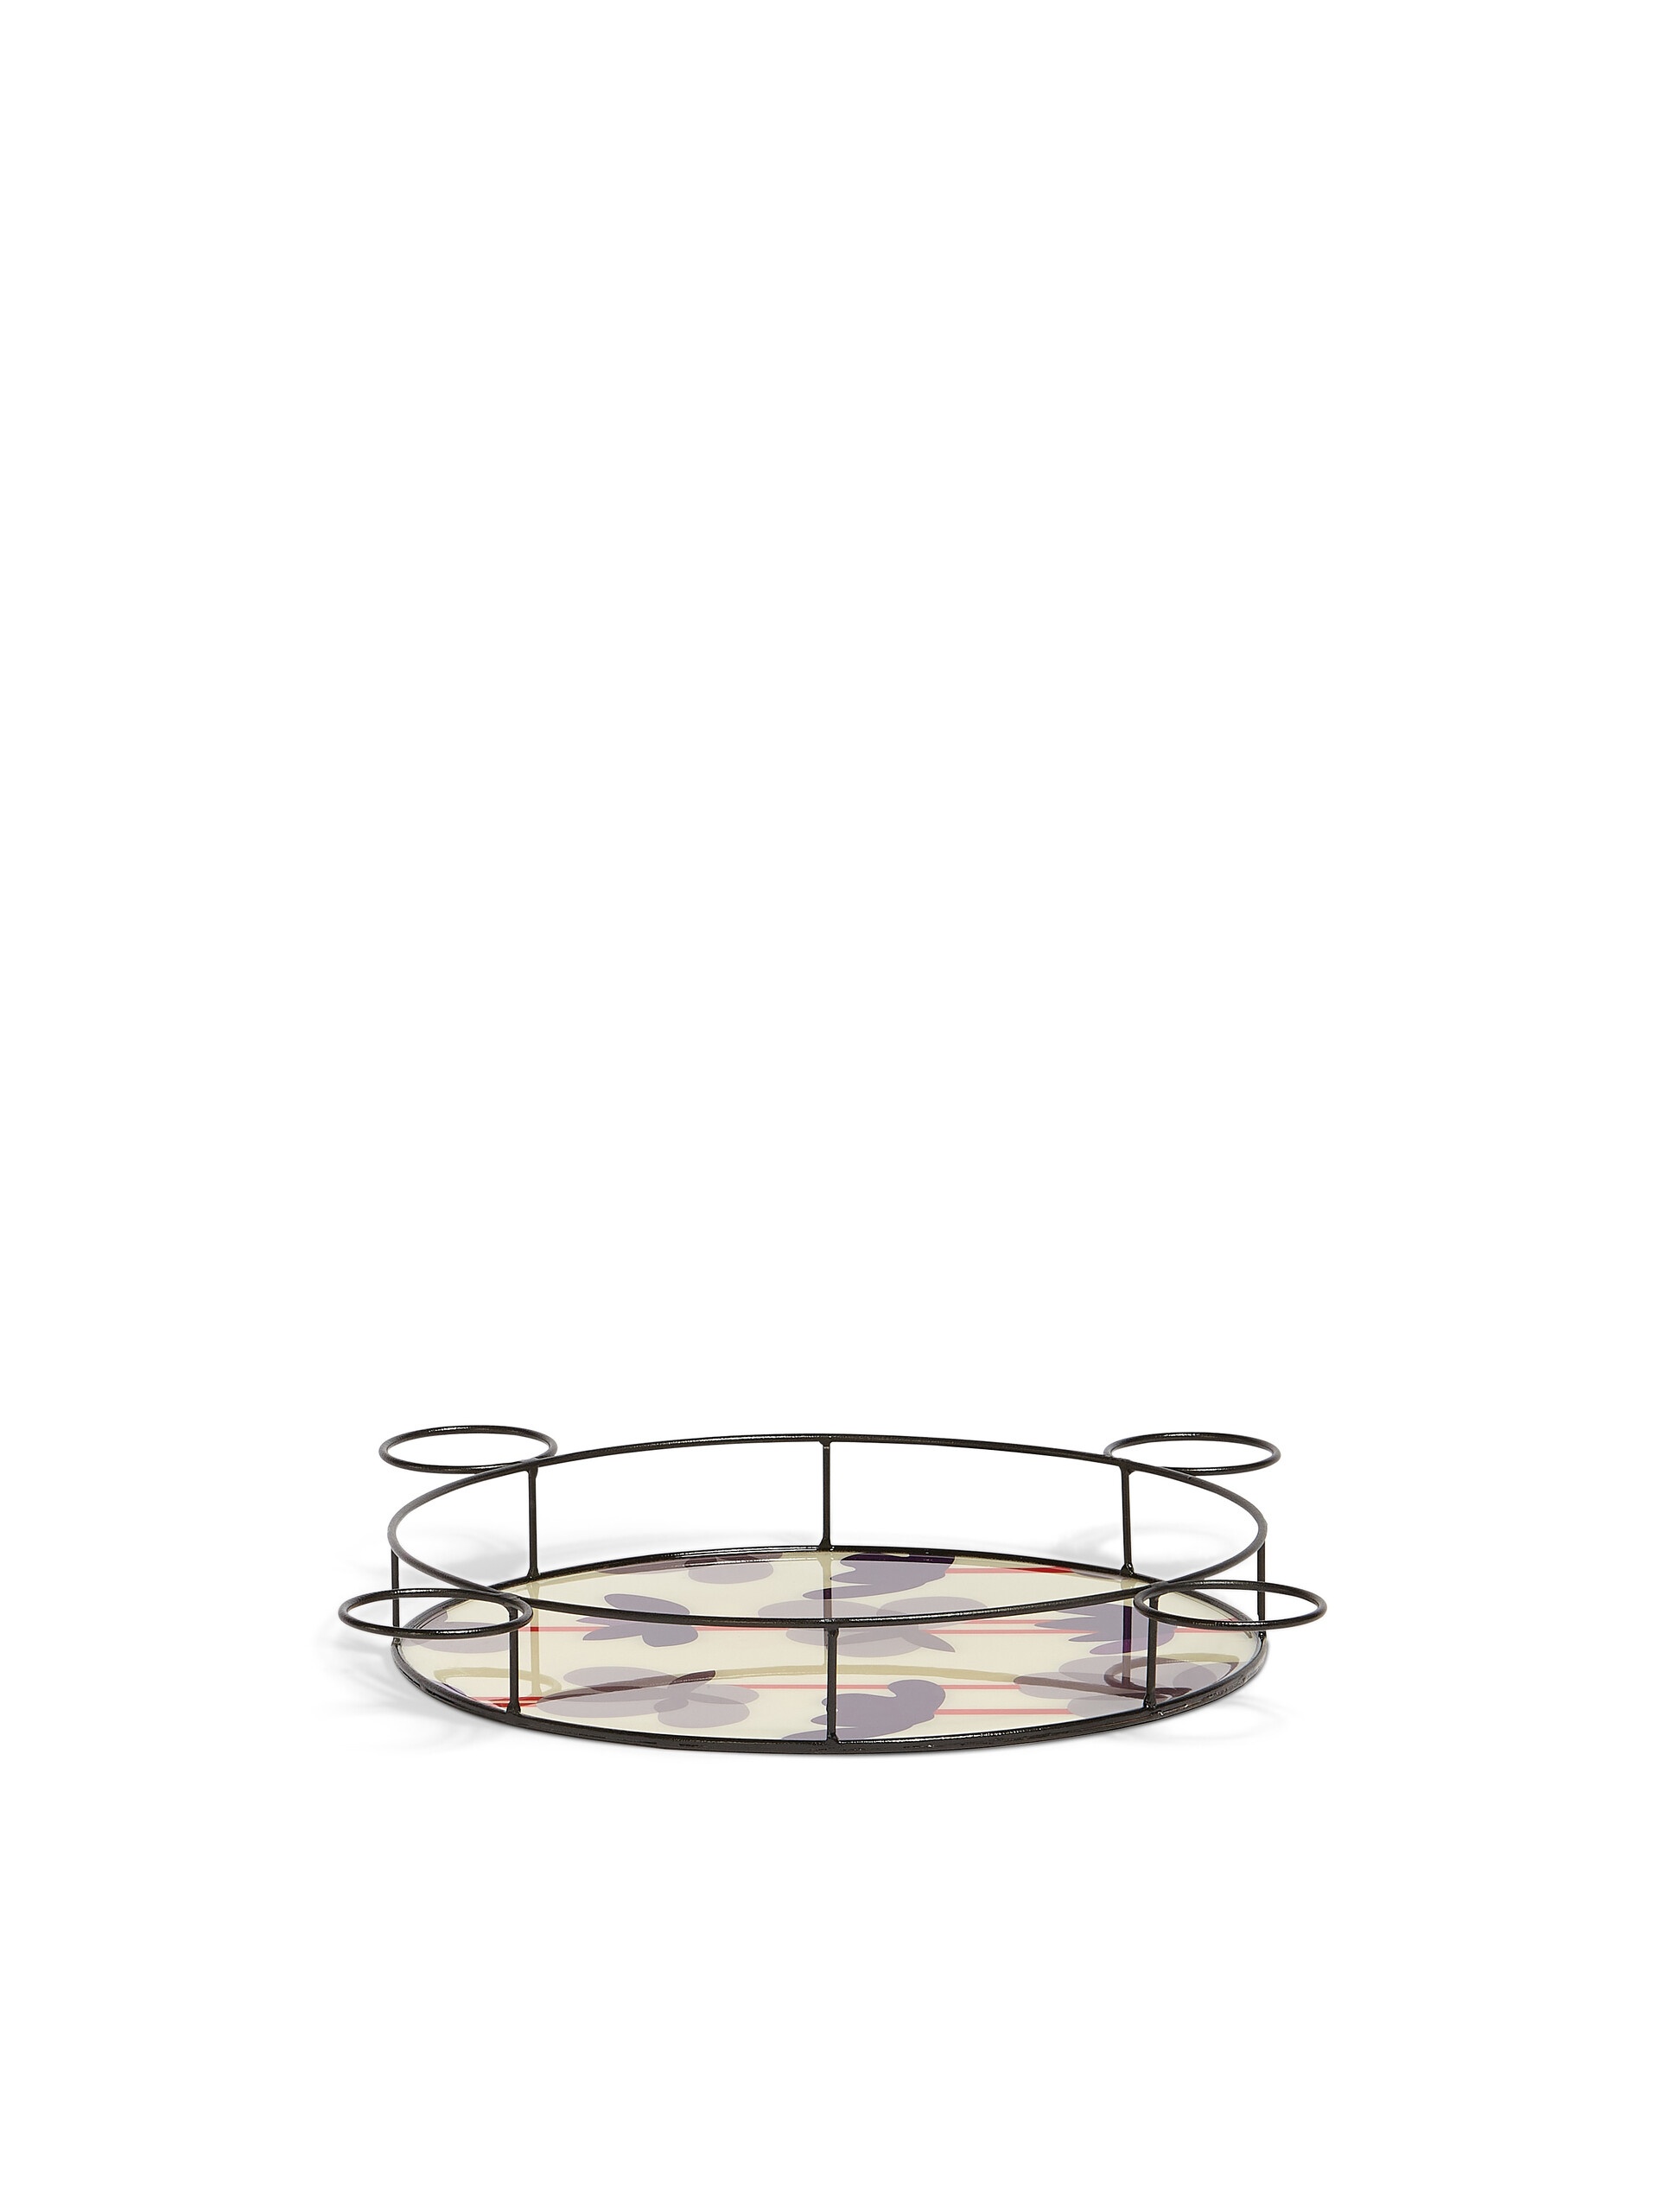 MARNI MARKET ROUND TRAY IN IRON AND FLOWER RESIN - 2